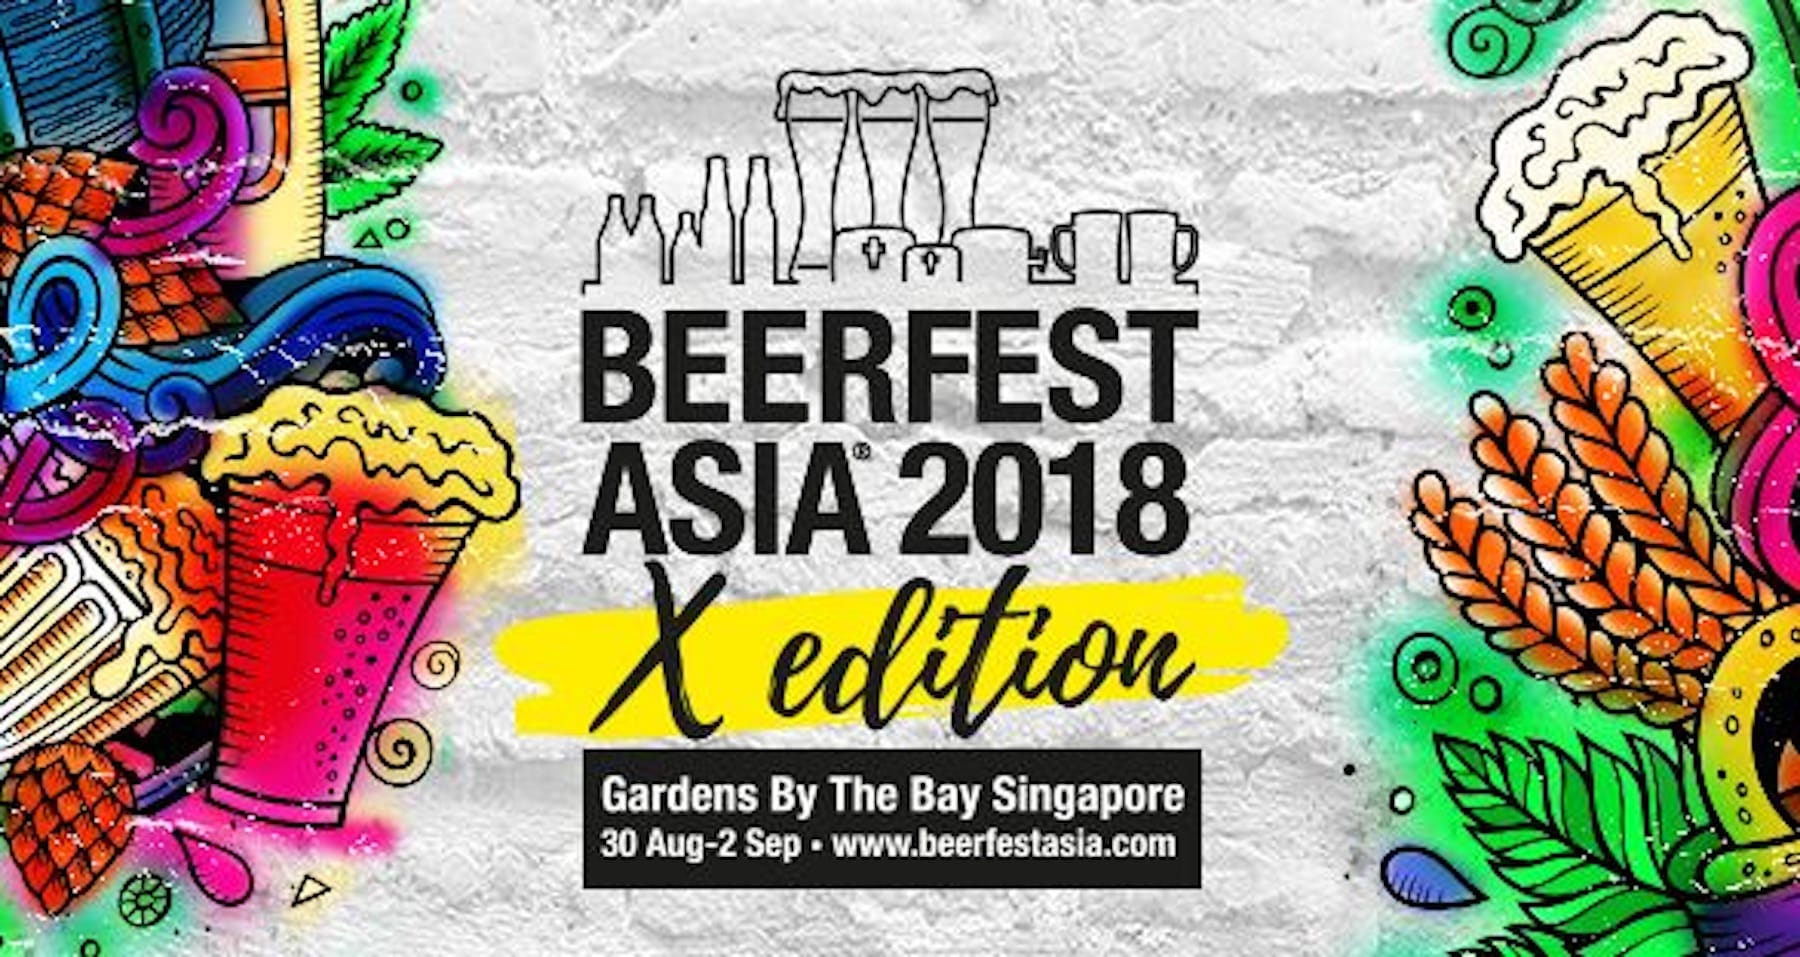 Things To Do This Weekend In Singapore (31st August - 2nd September) 7